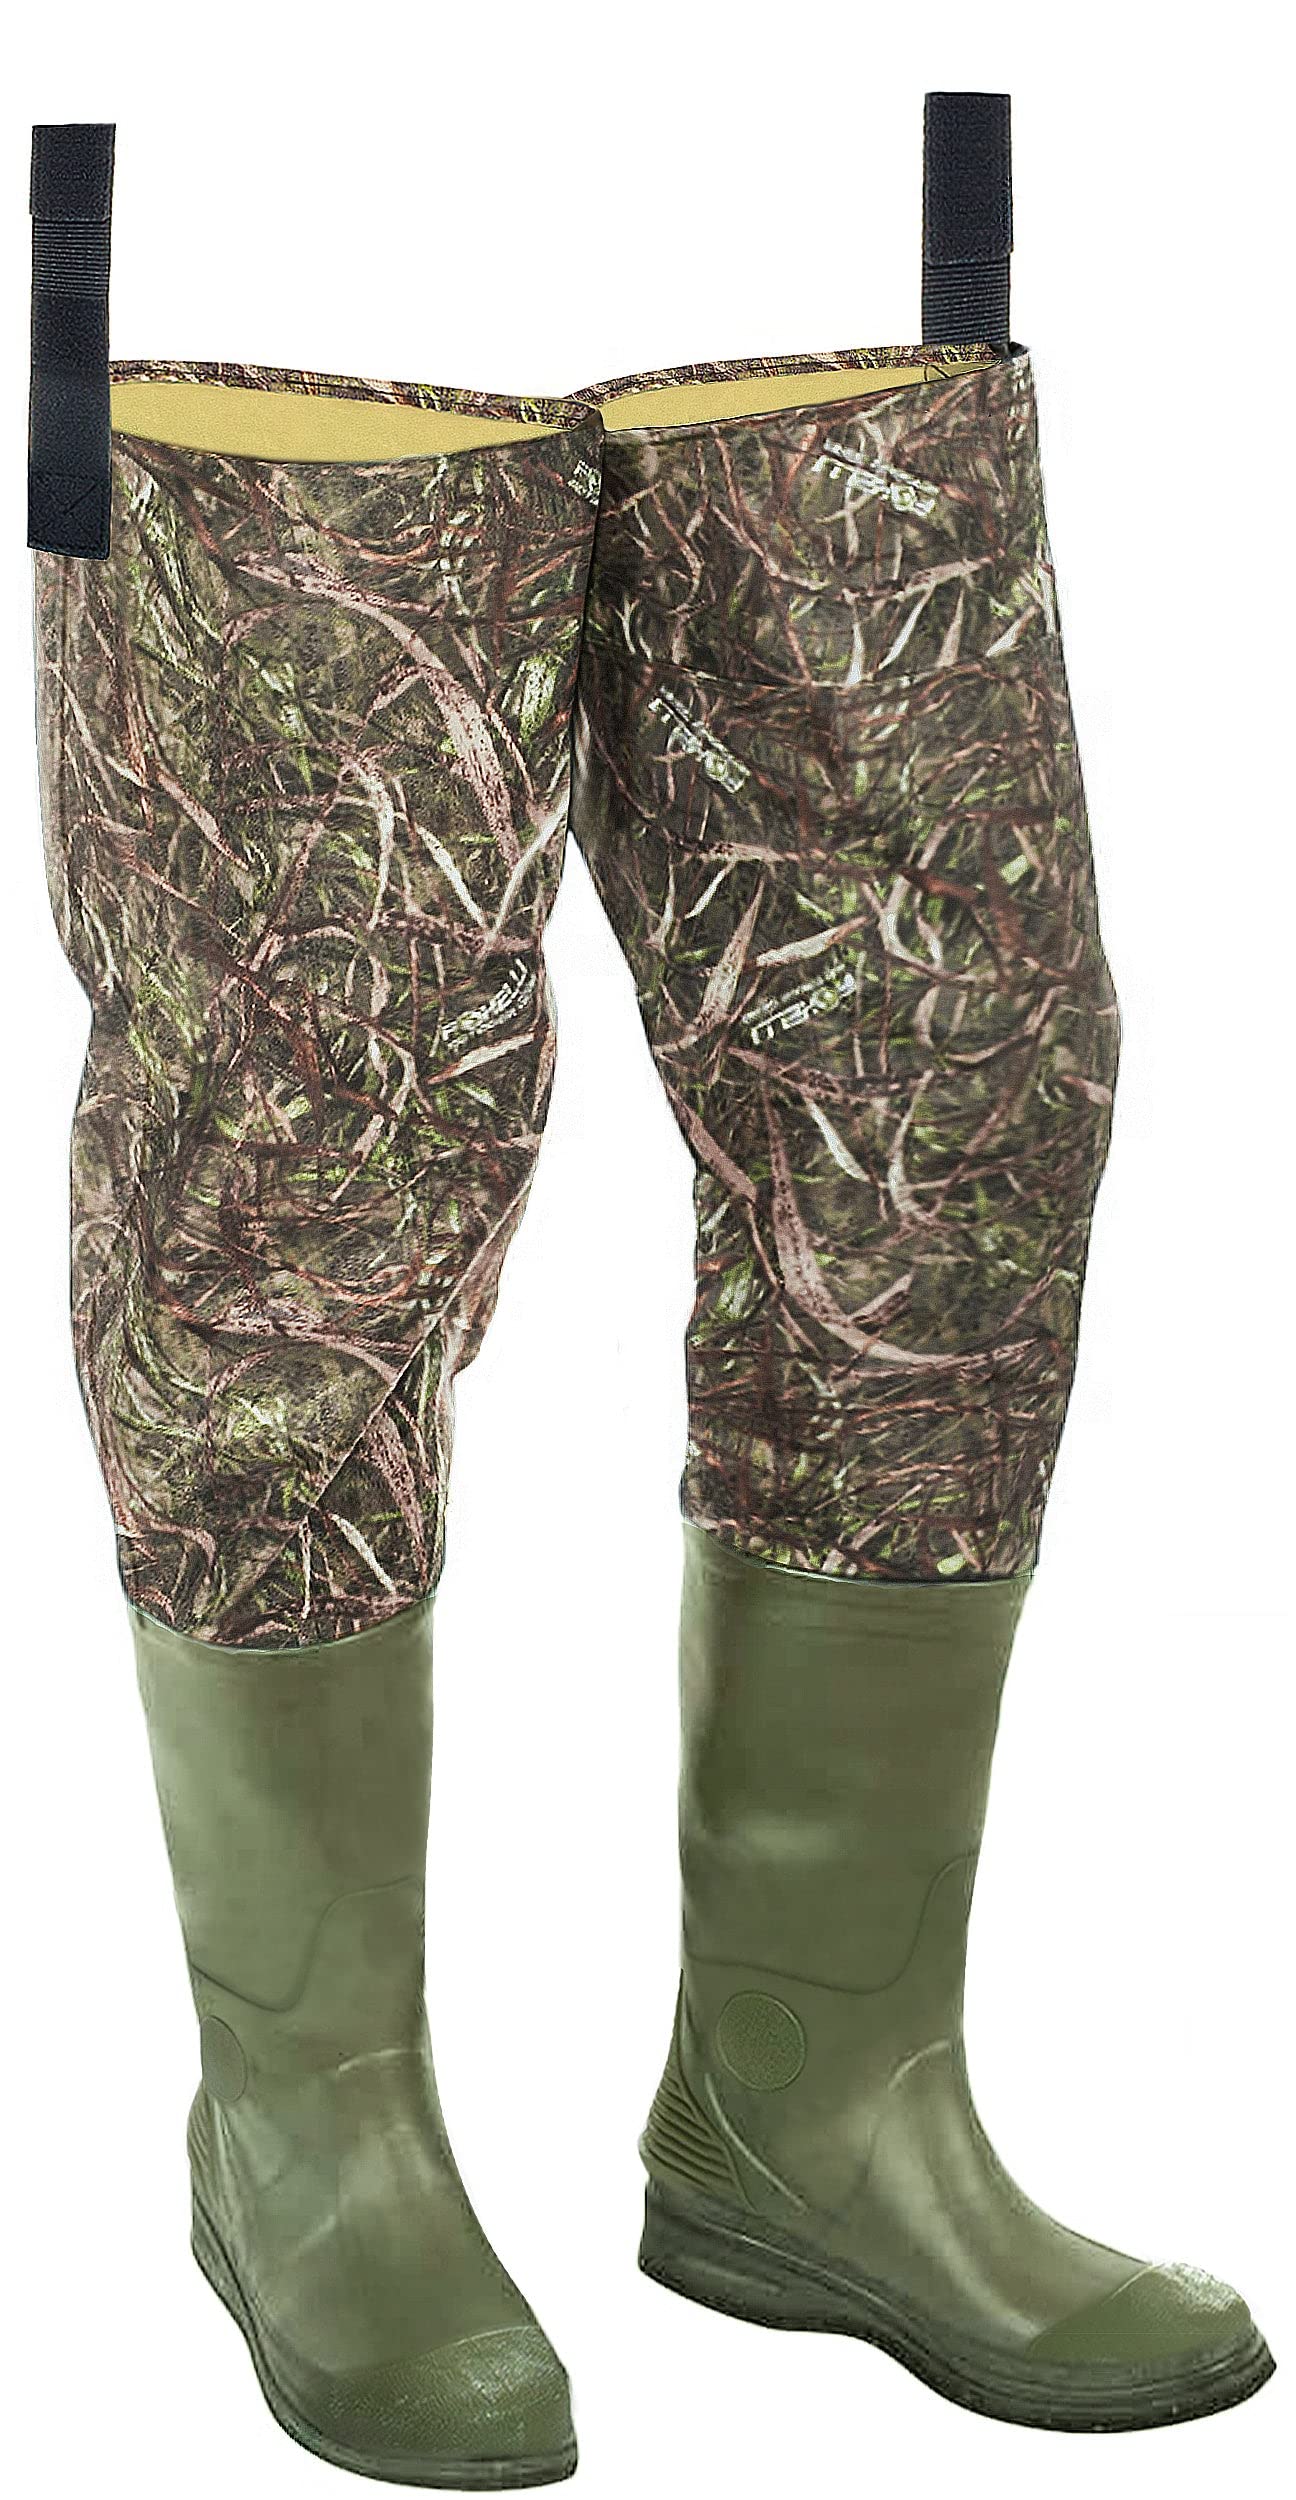 Foxelli Hip Waders Waterproof Camo Hip Waders for Men & Women with Boots  Lightweight Wading Hip